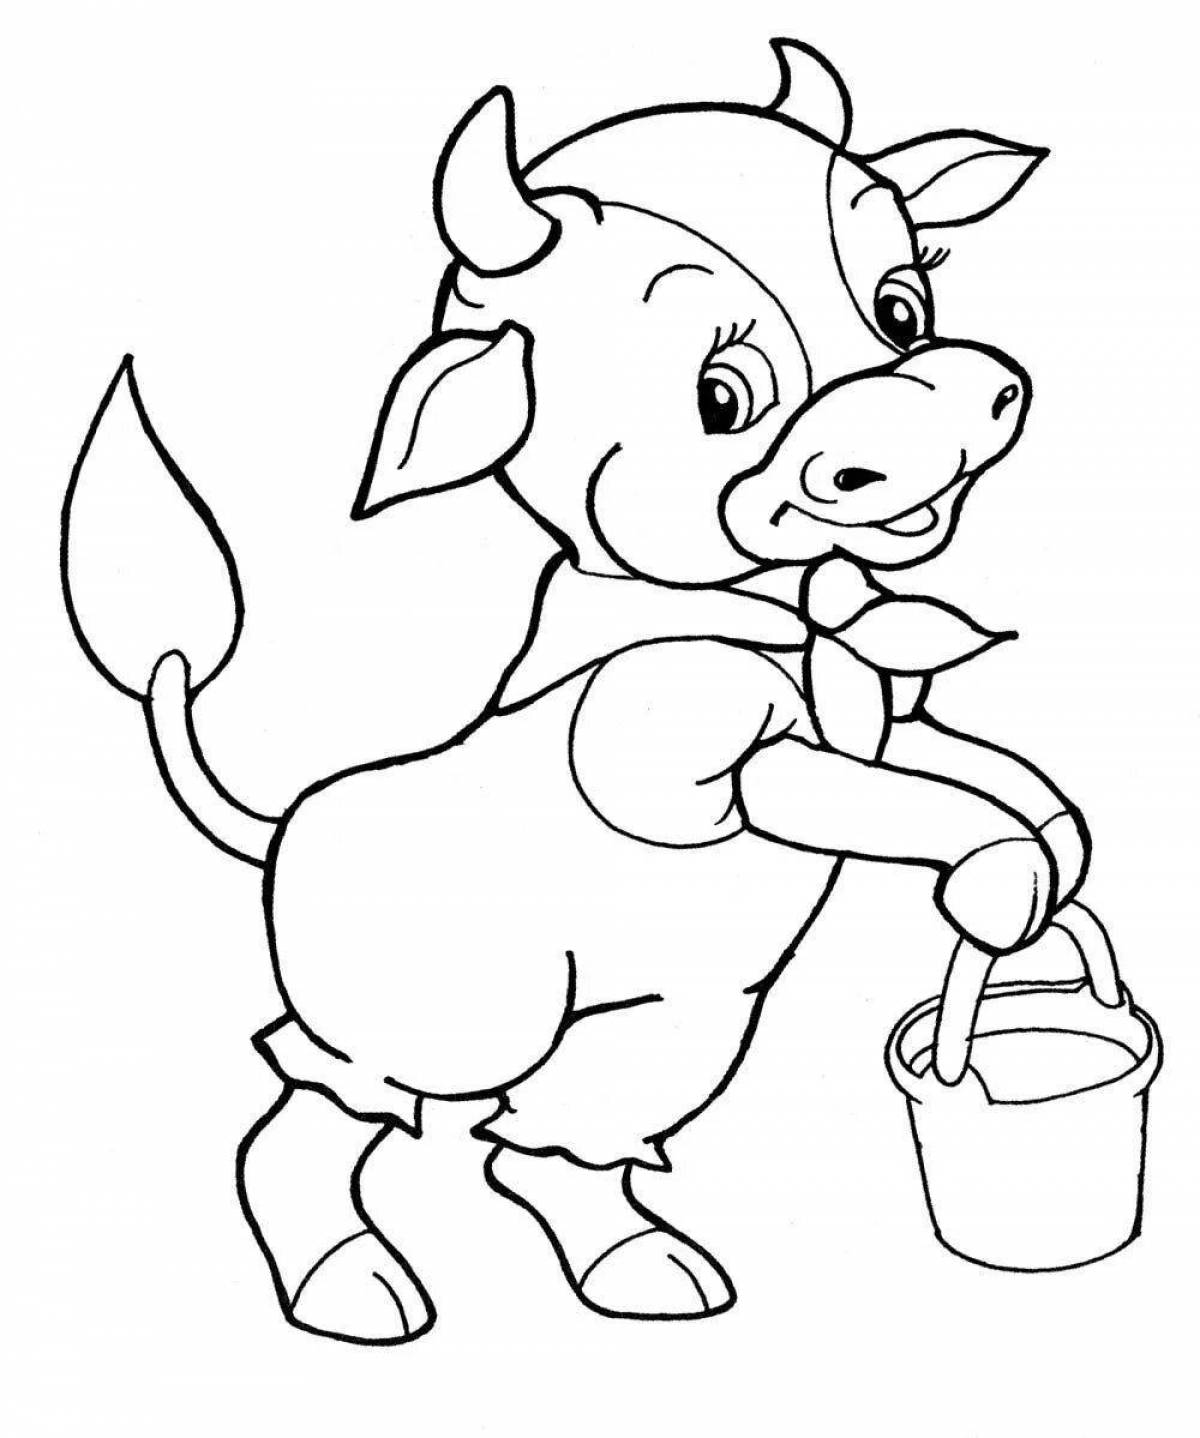 Fluffy cute cow coloring book